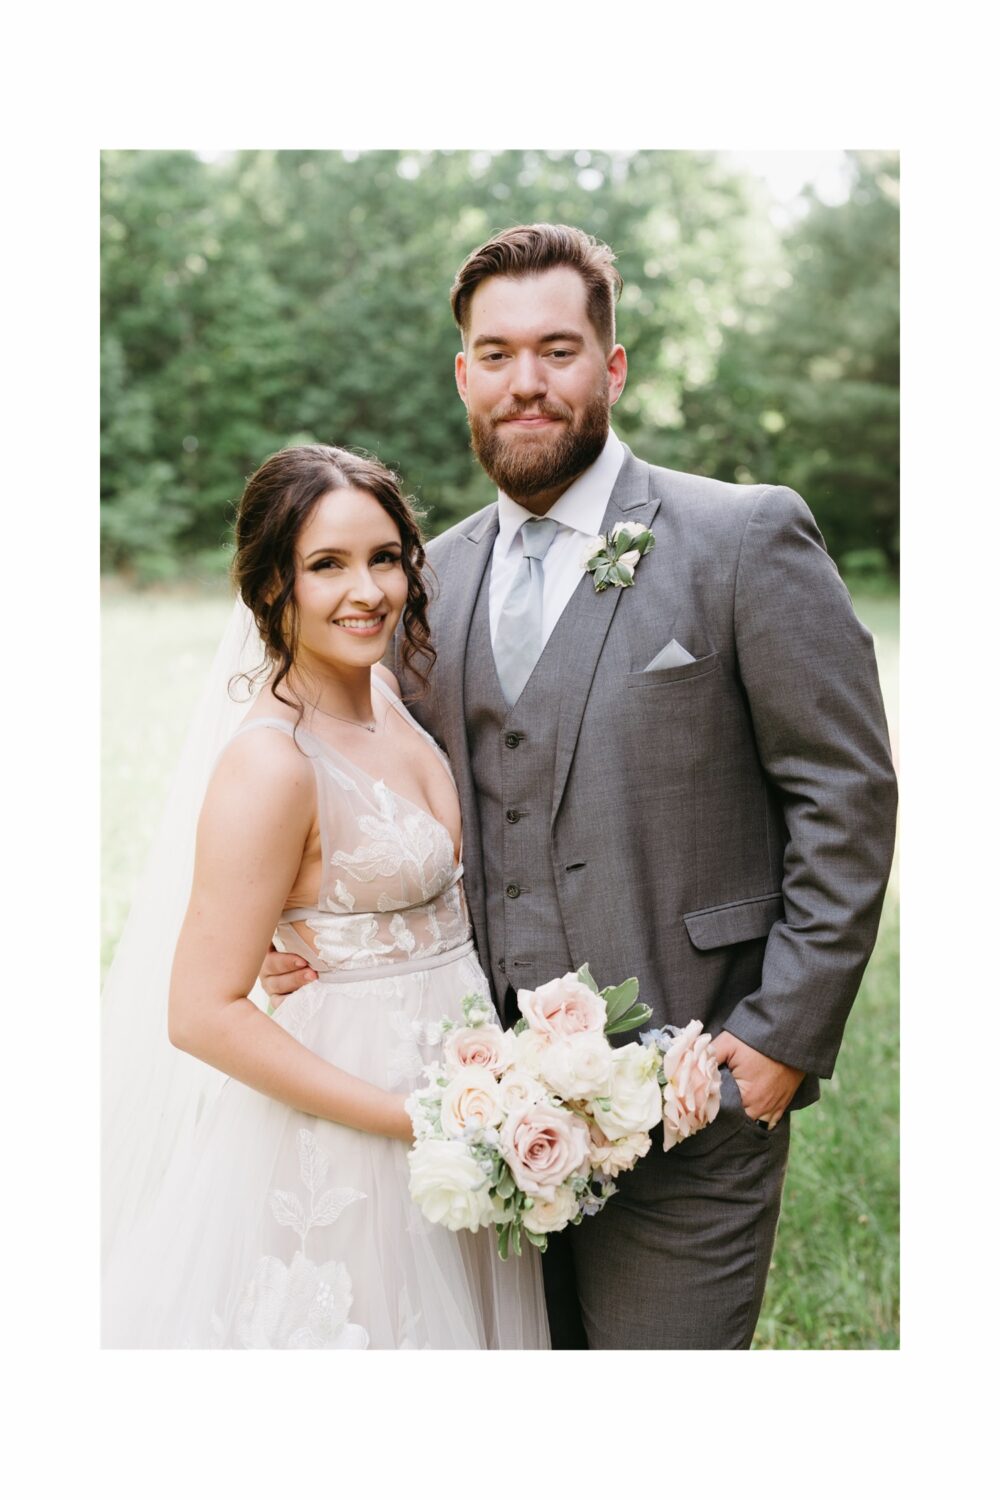 husband and wife portrait smiling floral bouquet